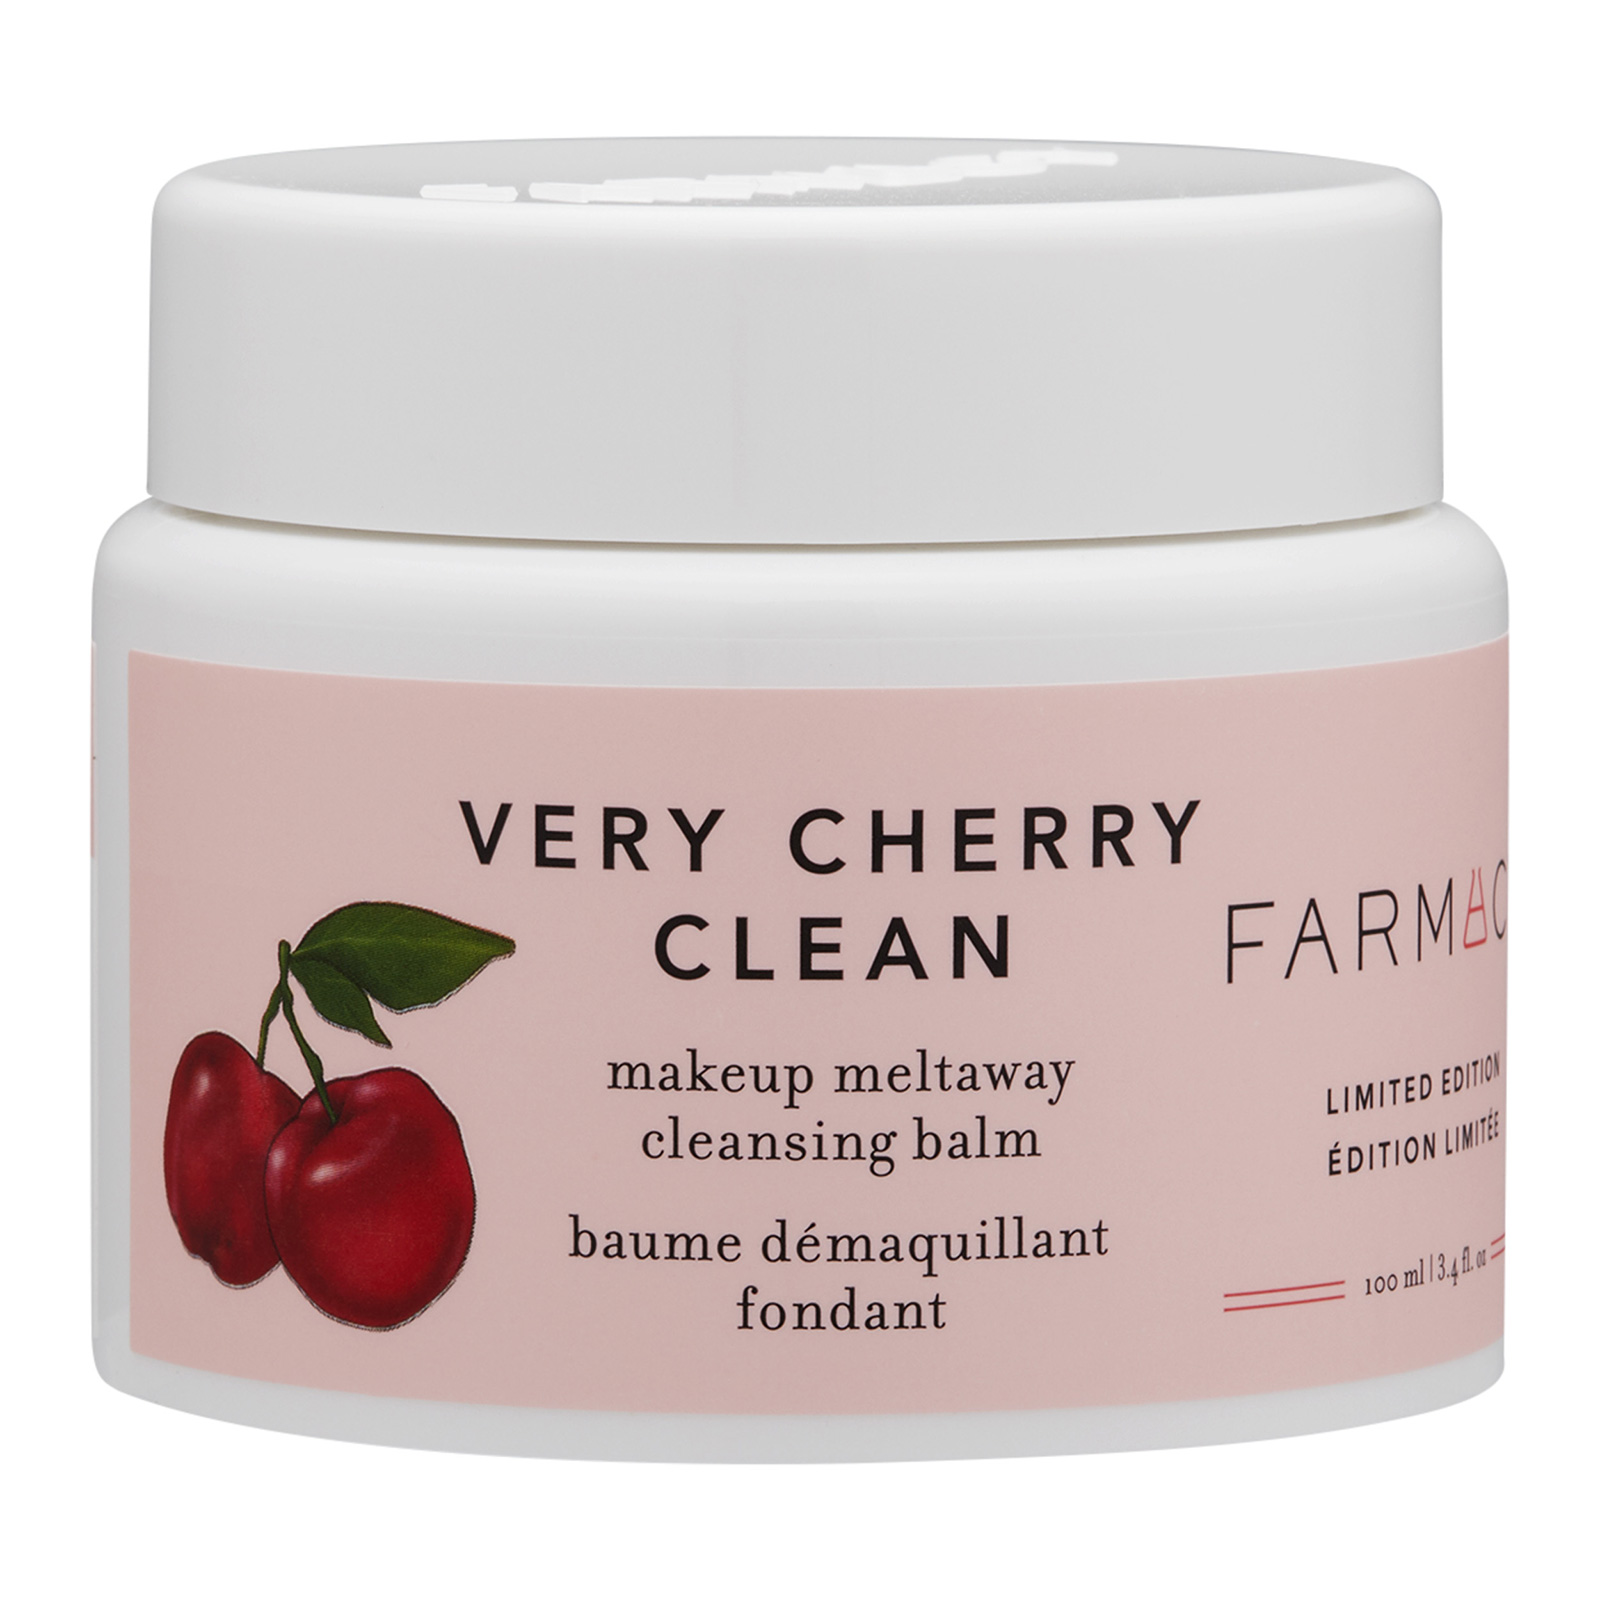 Very Cherry Clean Makeup Meltaway Cleansing Balm